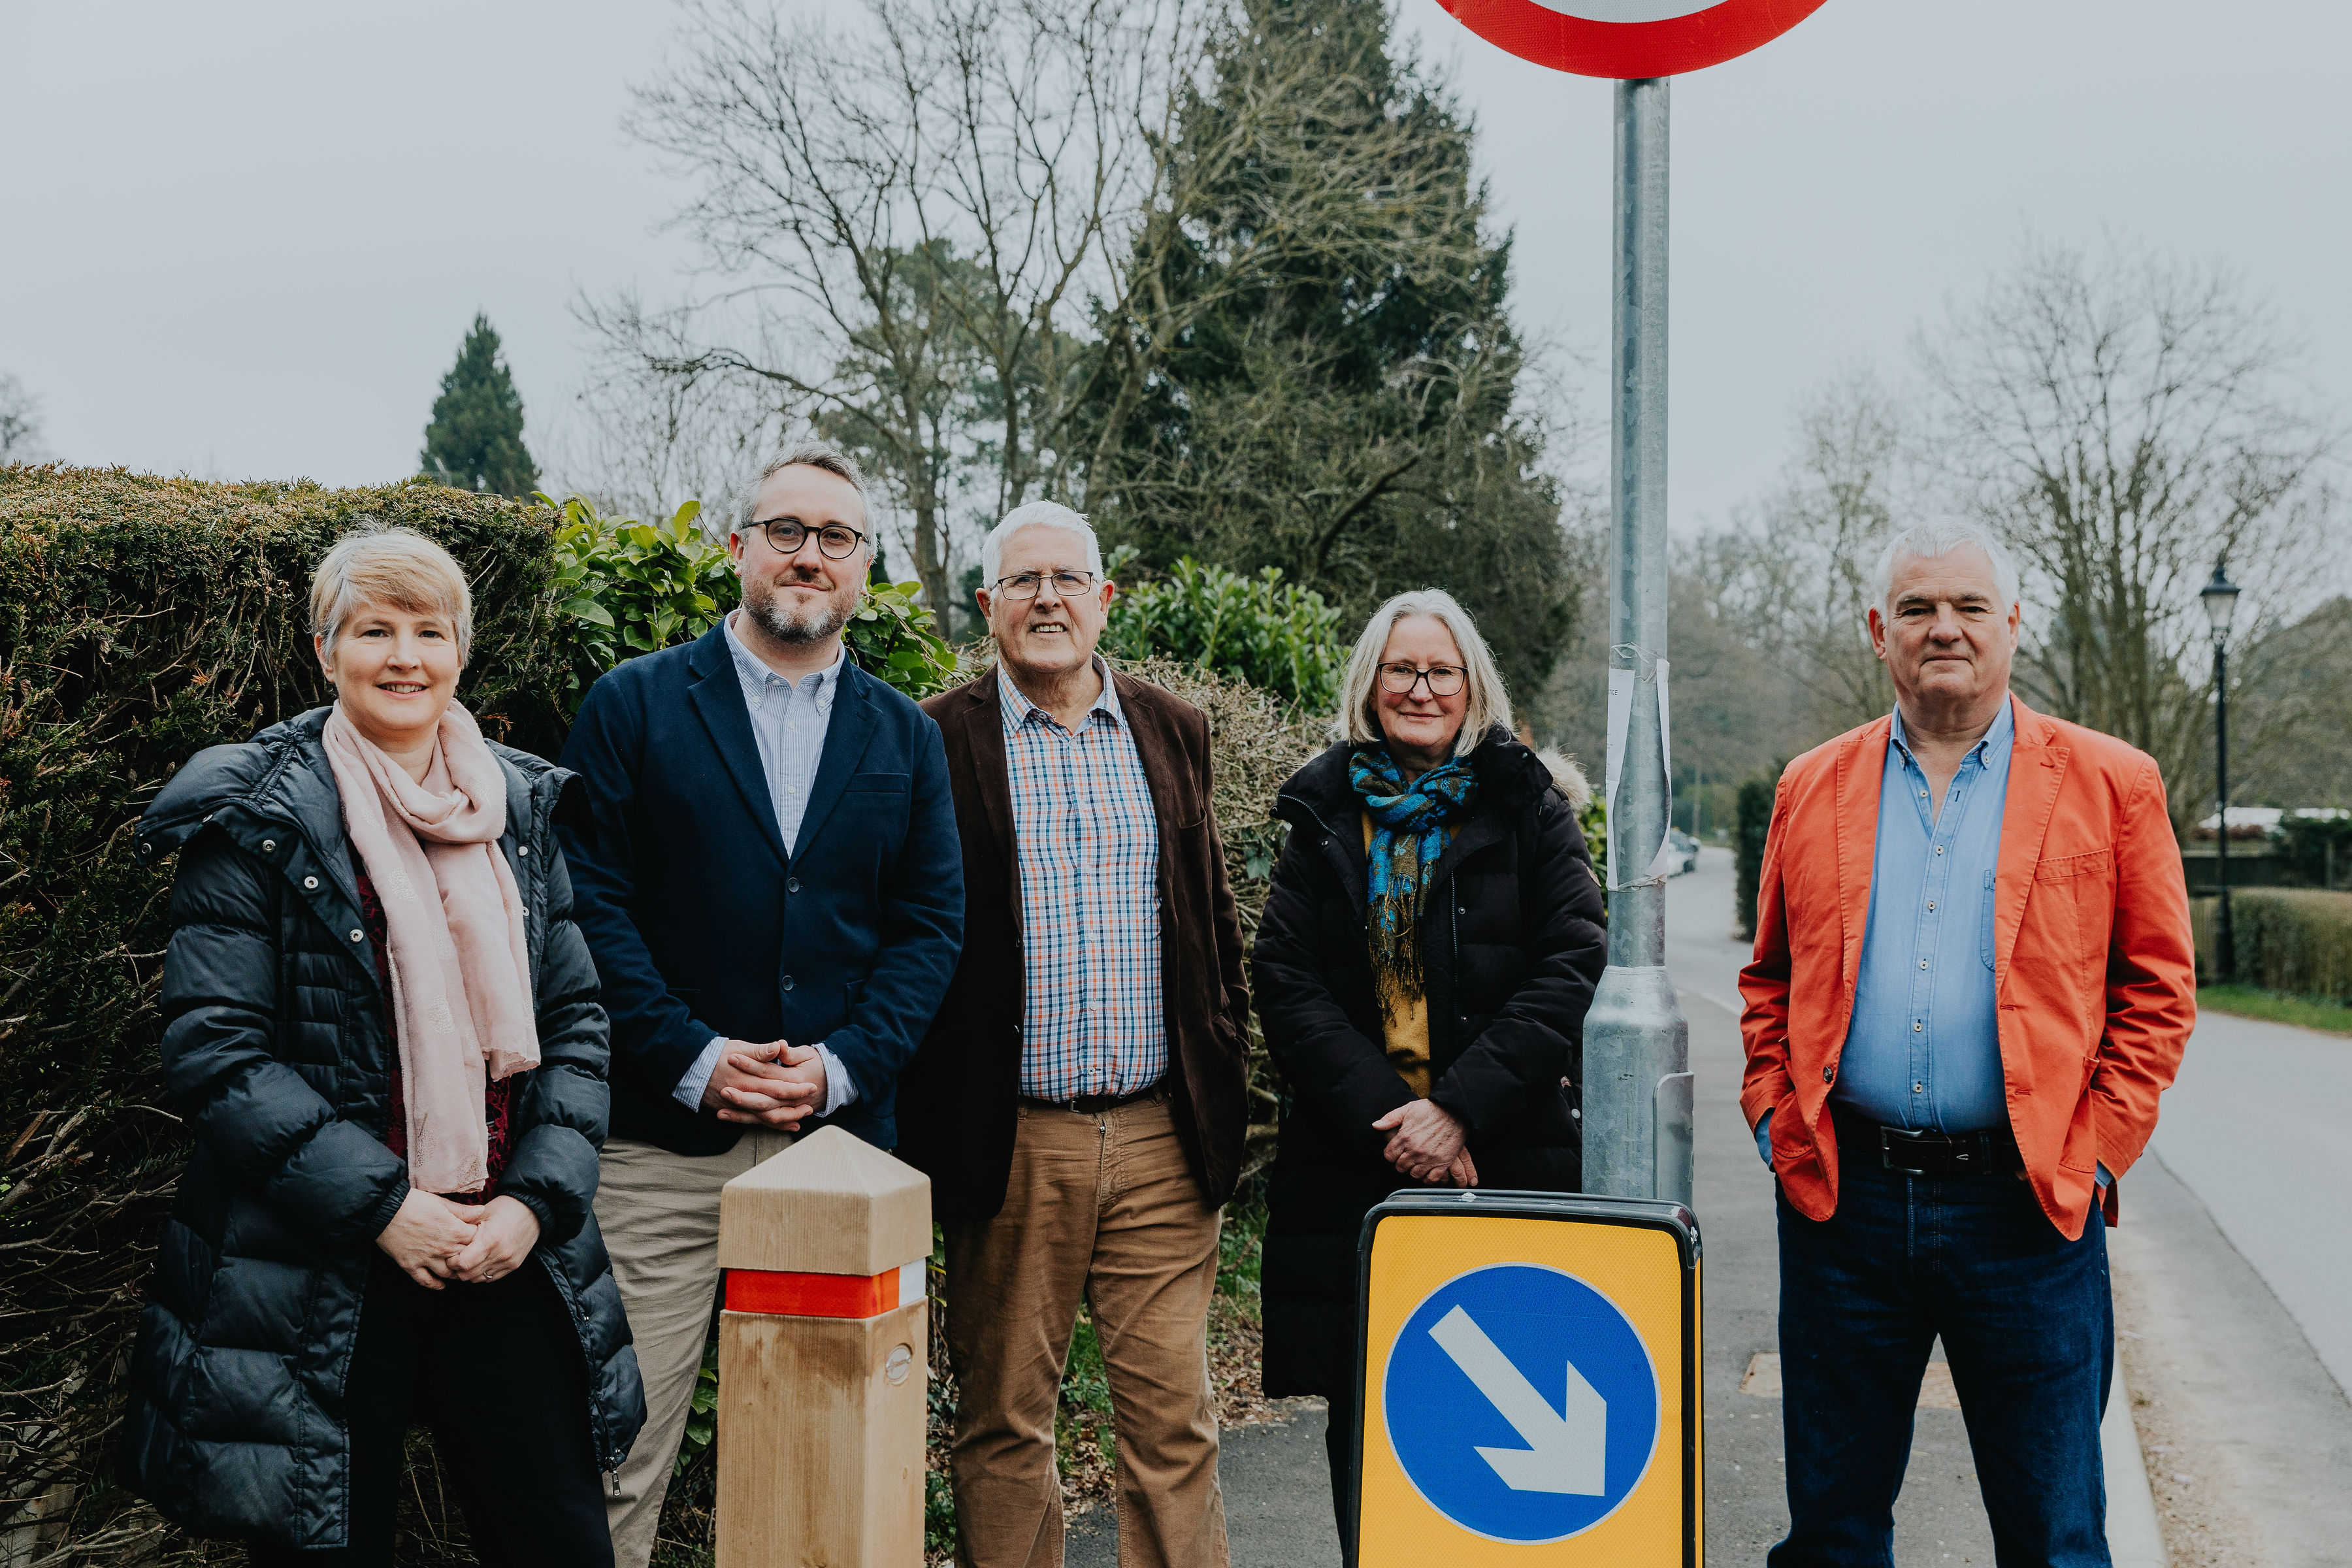 From left: Dinah Edwards – Berkswell Parish Council, Adam Tranter (West Midlands cycling and walking commissioner), Councillor Ken Hawkins (Solihull Council), Jane Edwards (Berkswell Charities) and Andrew Burrow (Berkswell Parish Council)